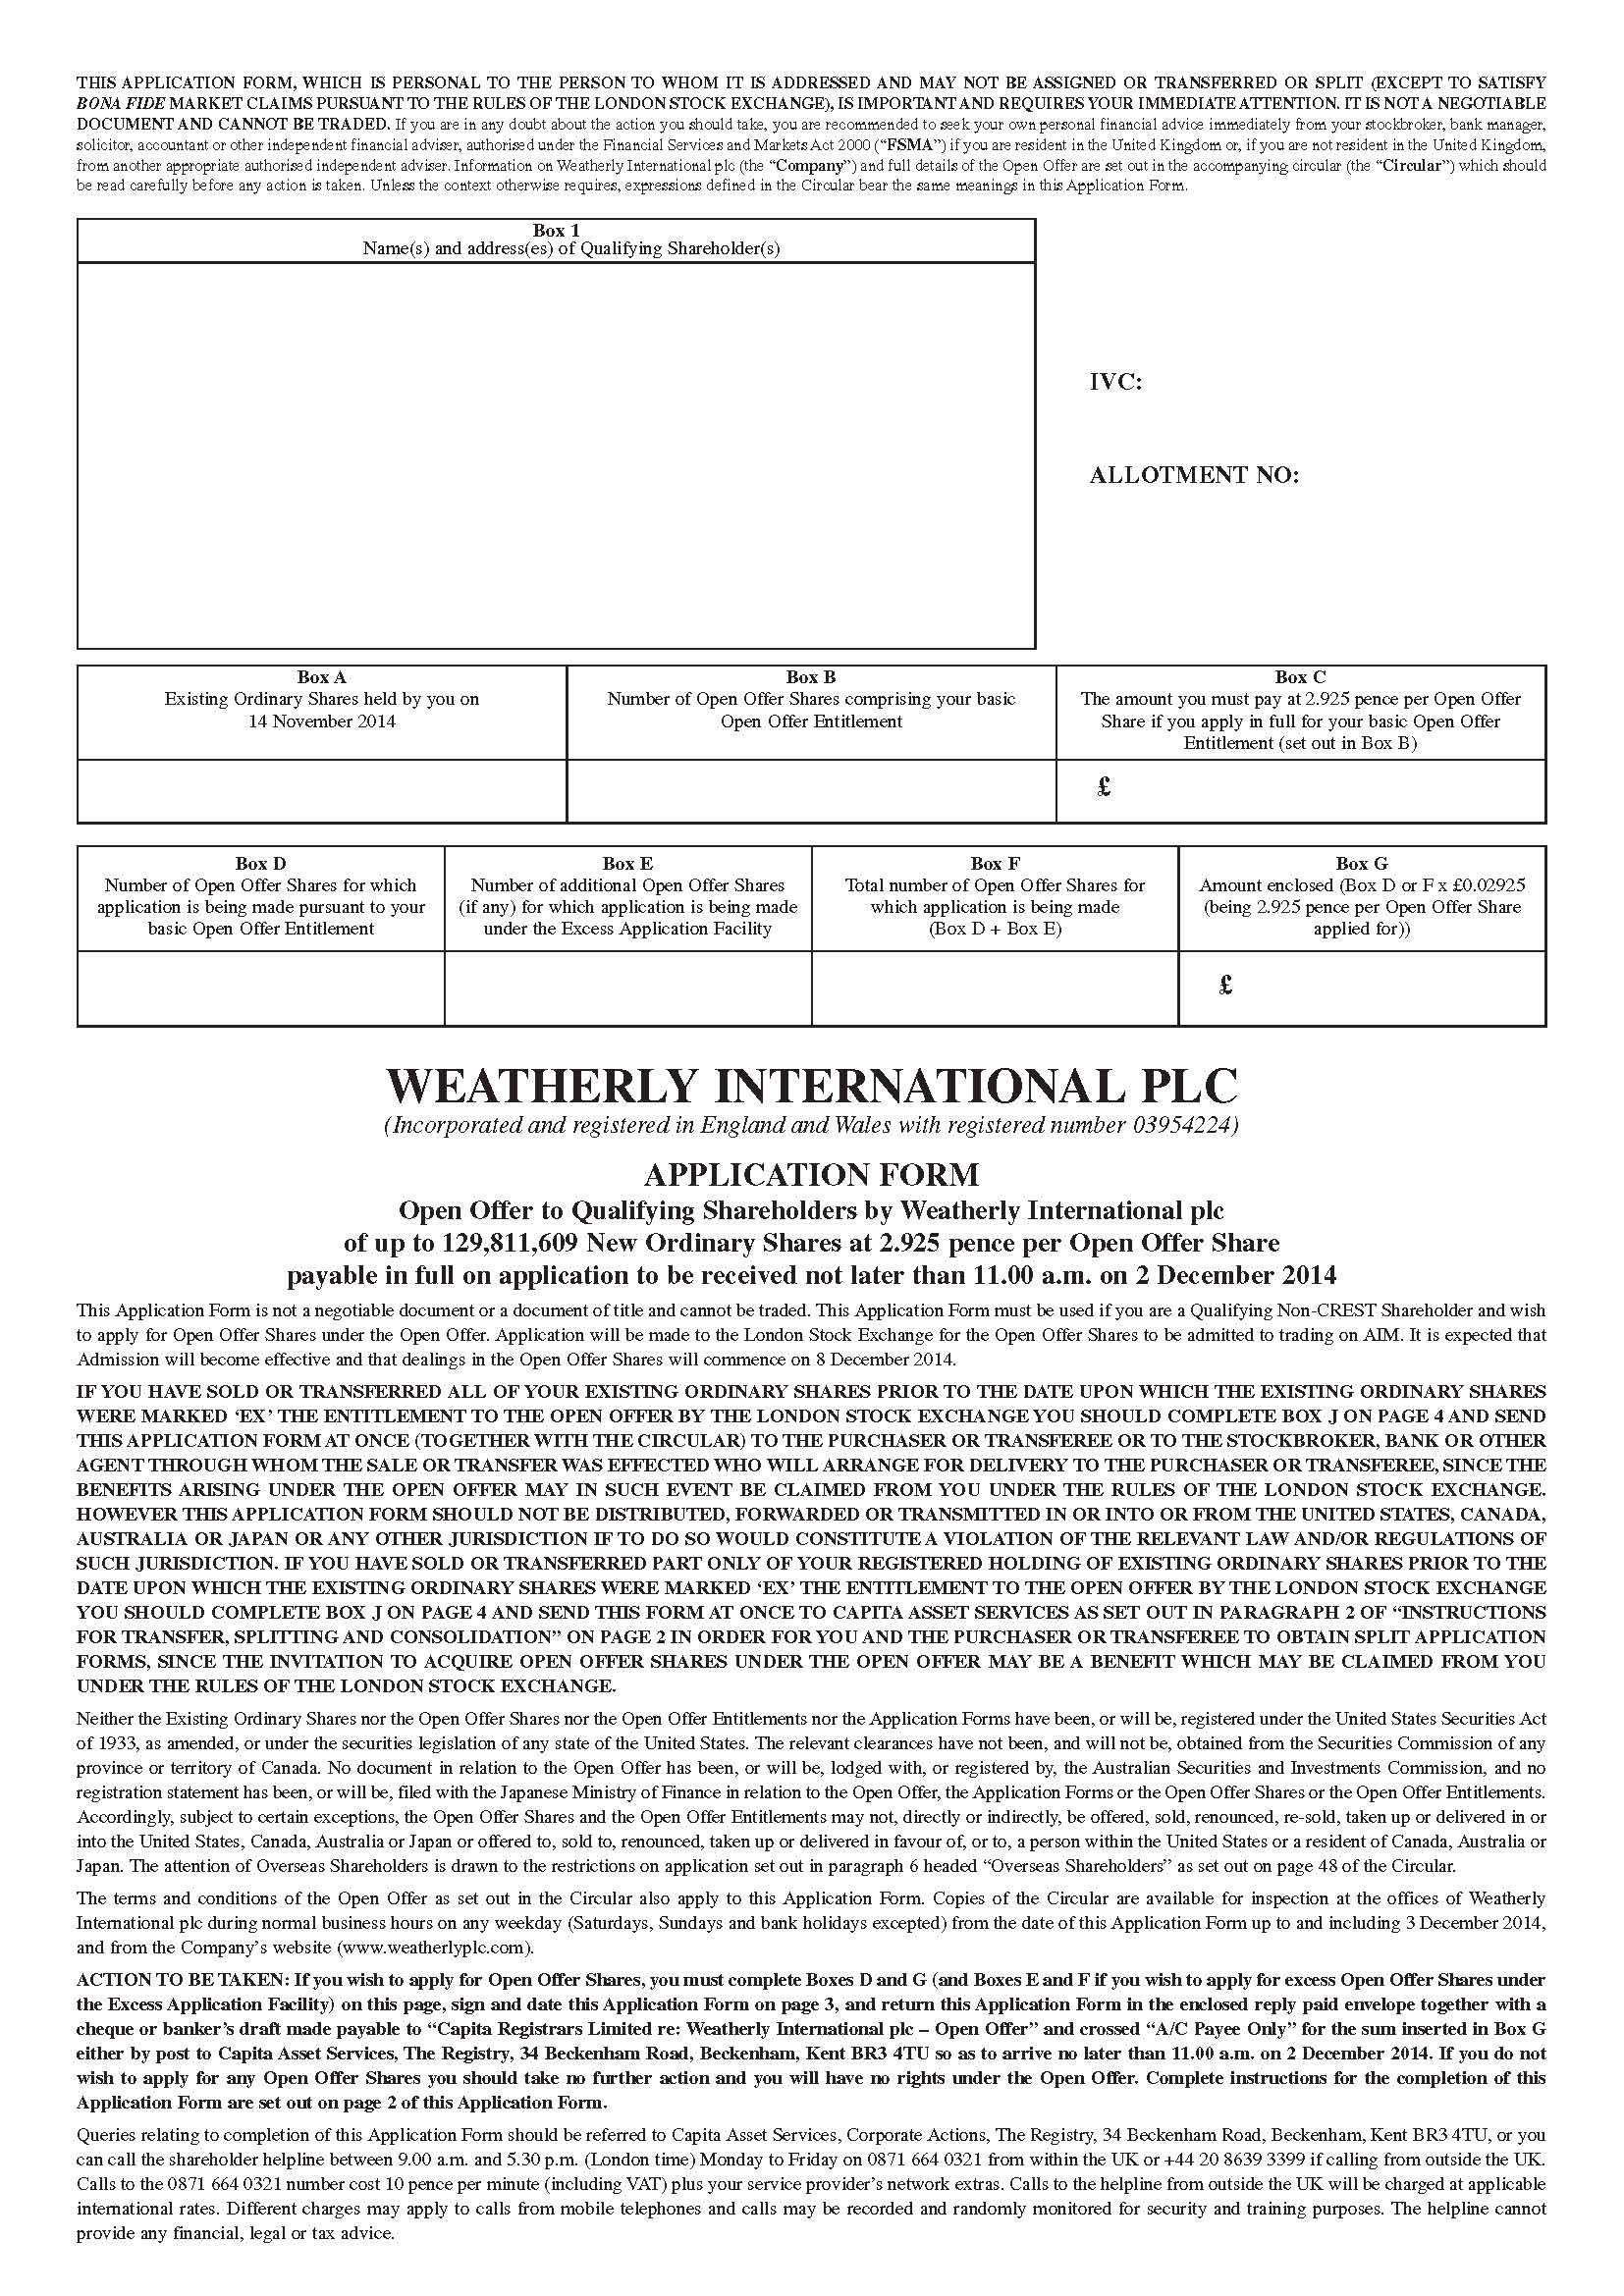 Weatherly Application Form